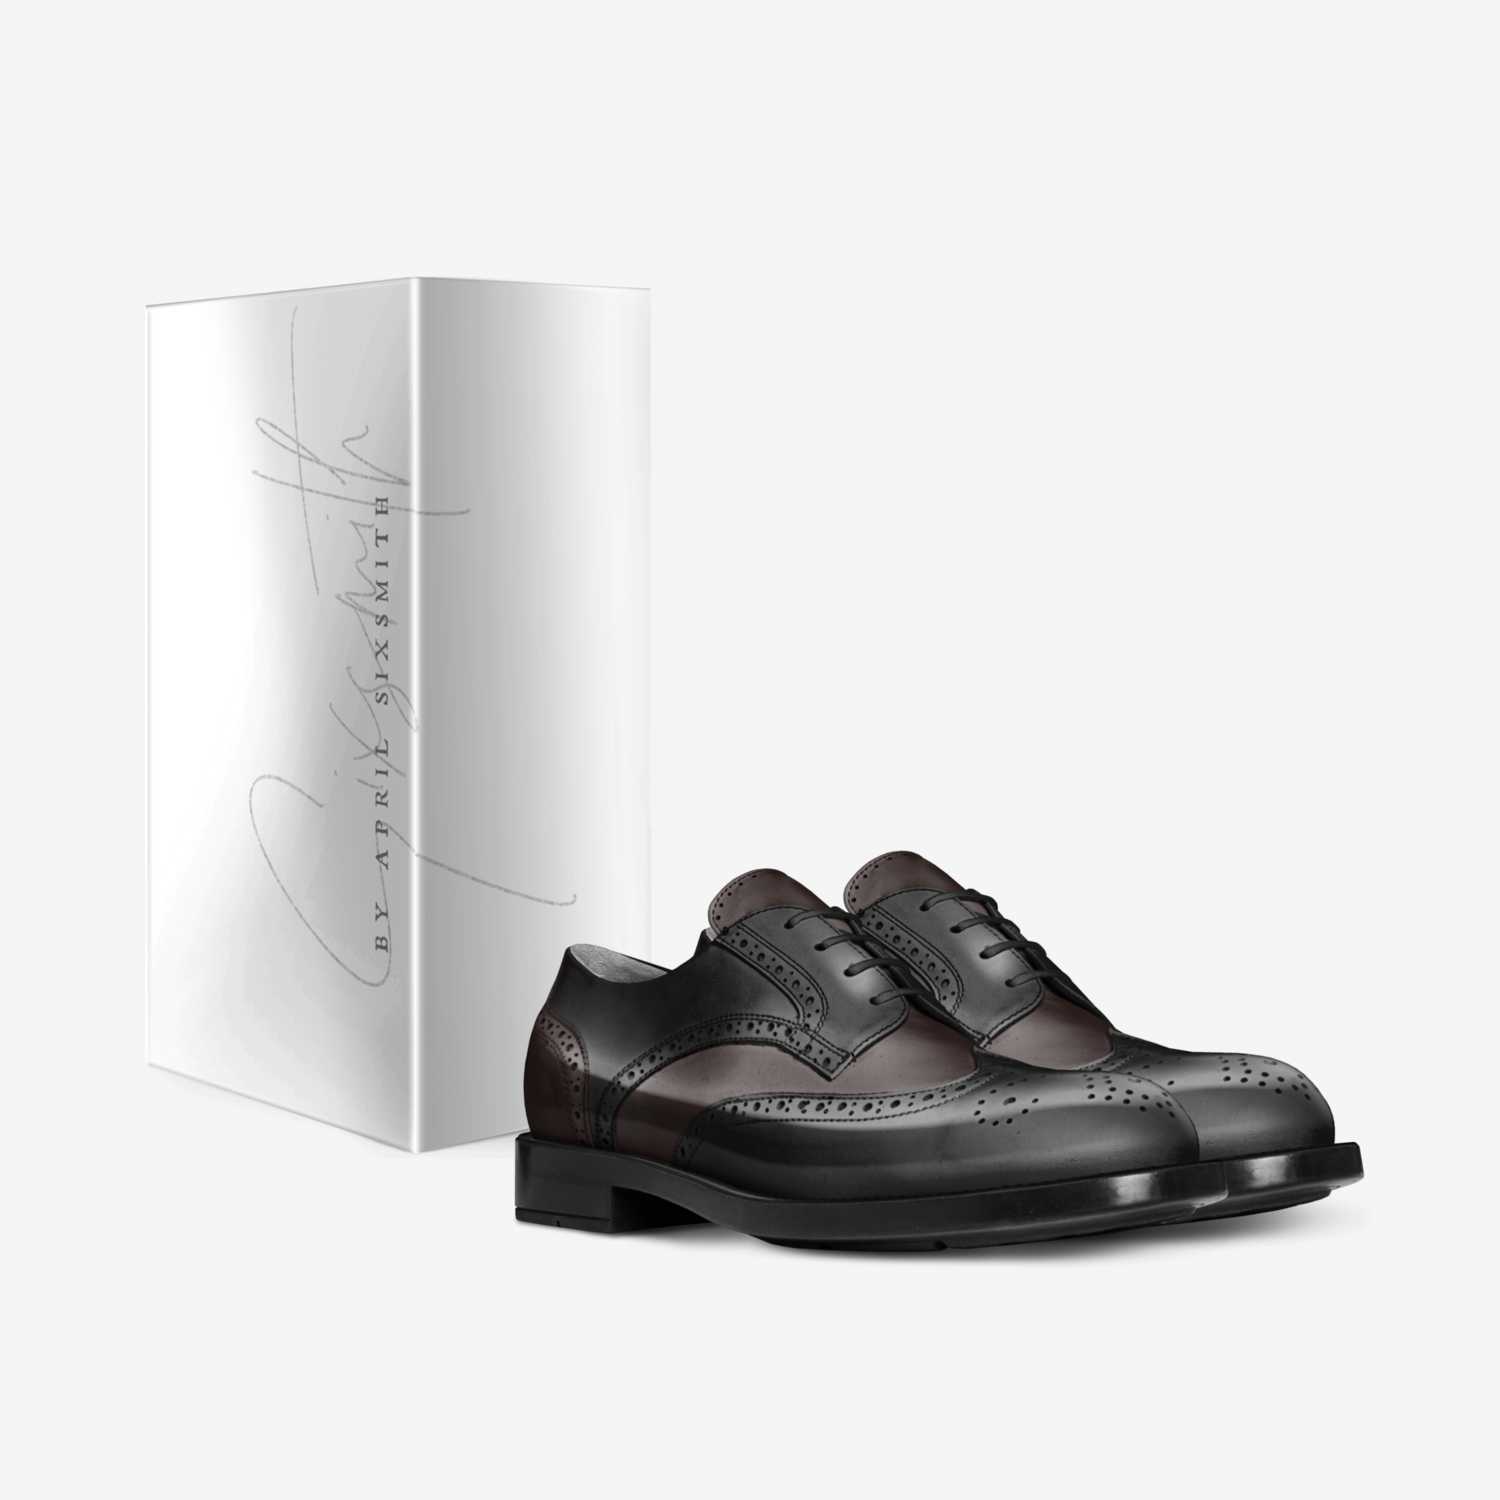 Sixsmith custom made in Italy shoes by April Sixsmith | Box view